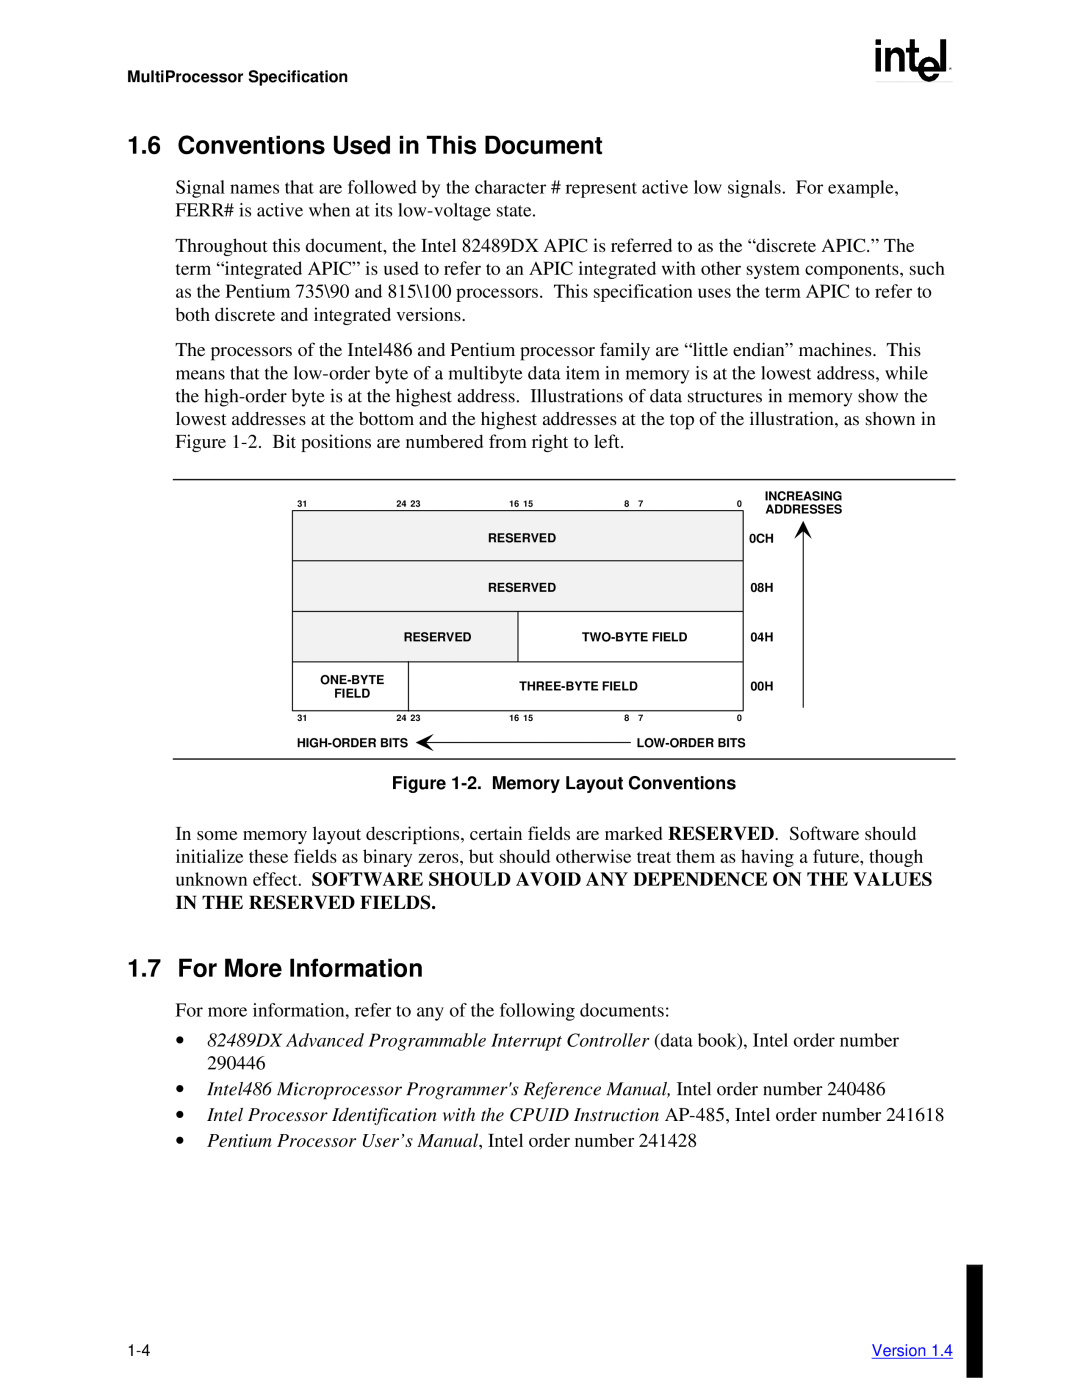 Intel MultiProcessor manual Conventions Used in This Document, For More Information, In The Reserved Fields 